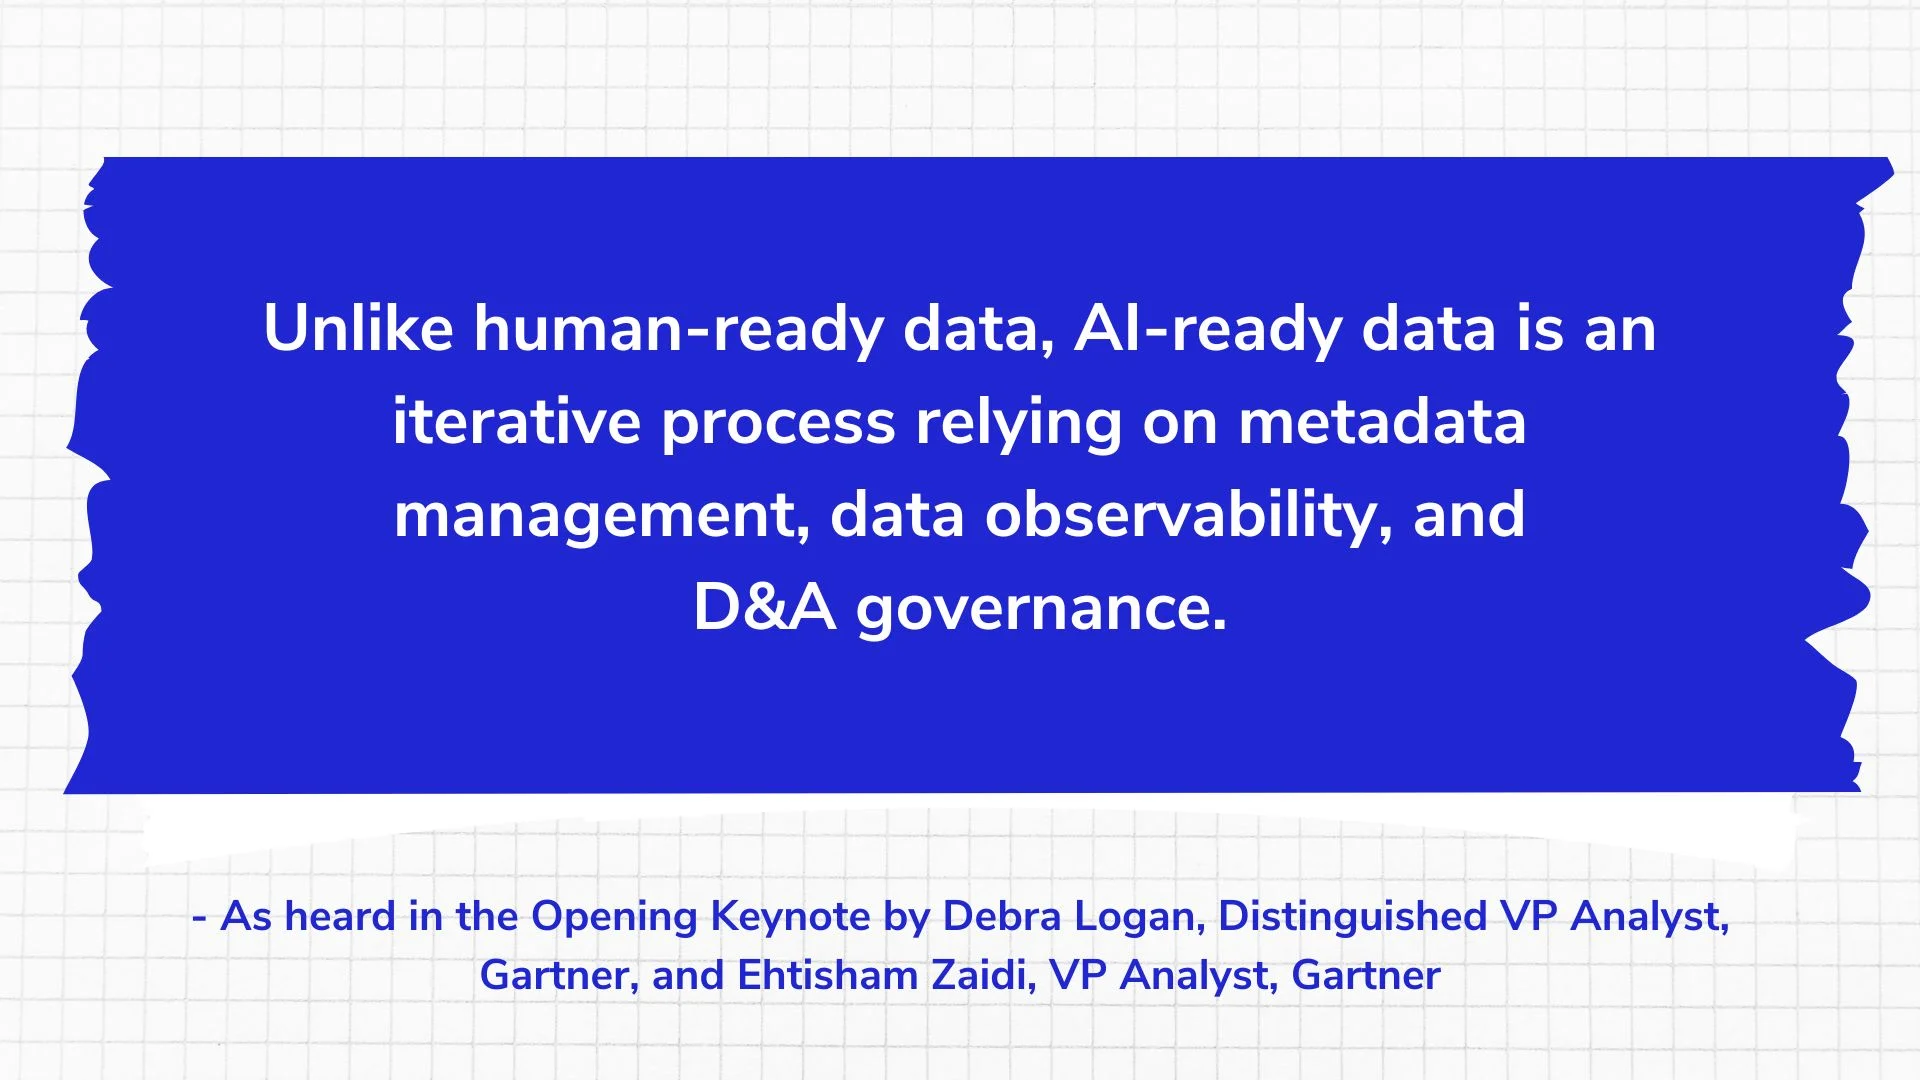 Unlike human-ready data, AI-ready data is an iterative process relying on metadata management, data observability, and D&A governance.